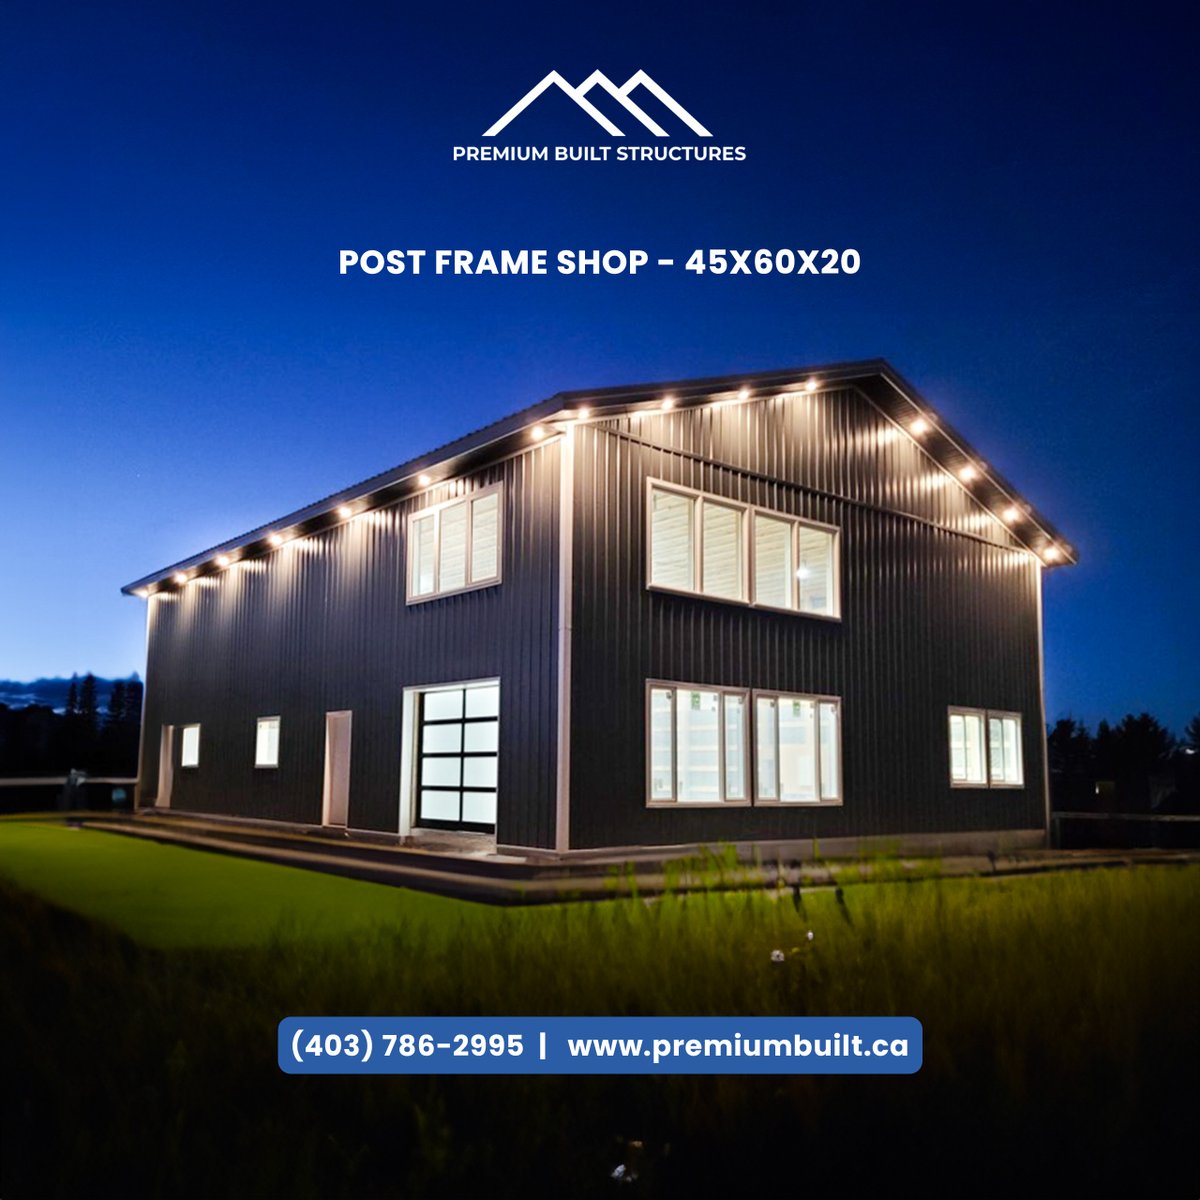 Take a look at this 45x60x20 post frame shop. Complete with sunshine doors to let in plenty of natural light. A great space for all kinds of projects or storage.
Get a quote today!

✉️ info@premiumbuilt.ca
🌐 premiumbuilt.ca

#Shouse #PostFrameBuilding #PremiumBuilt